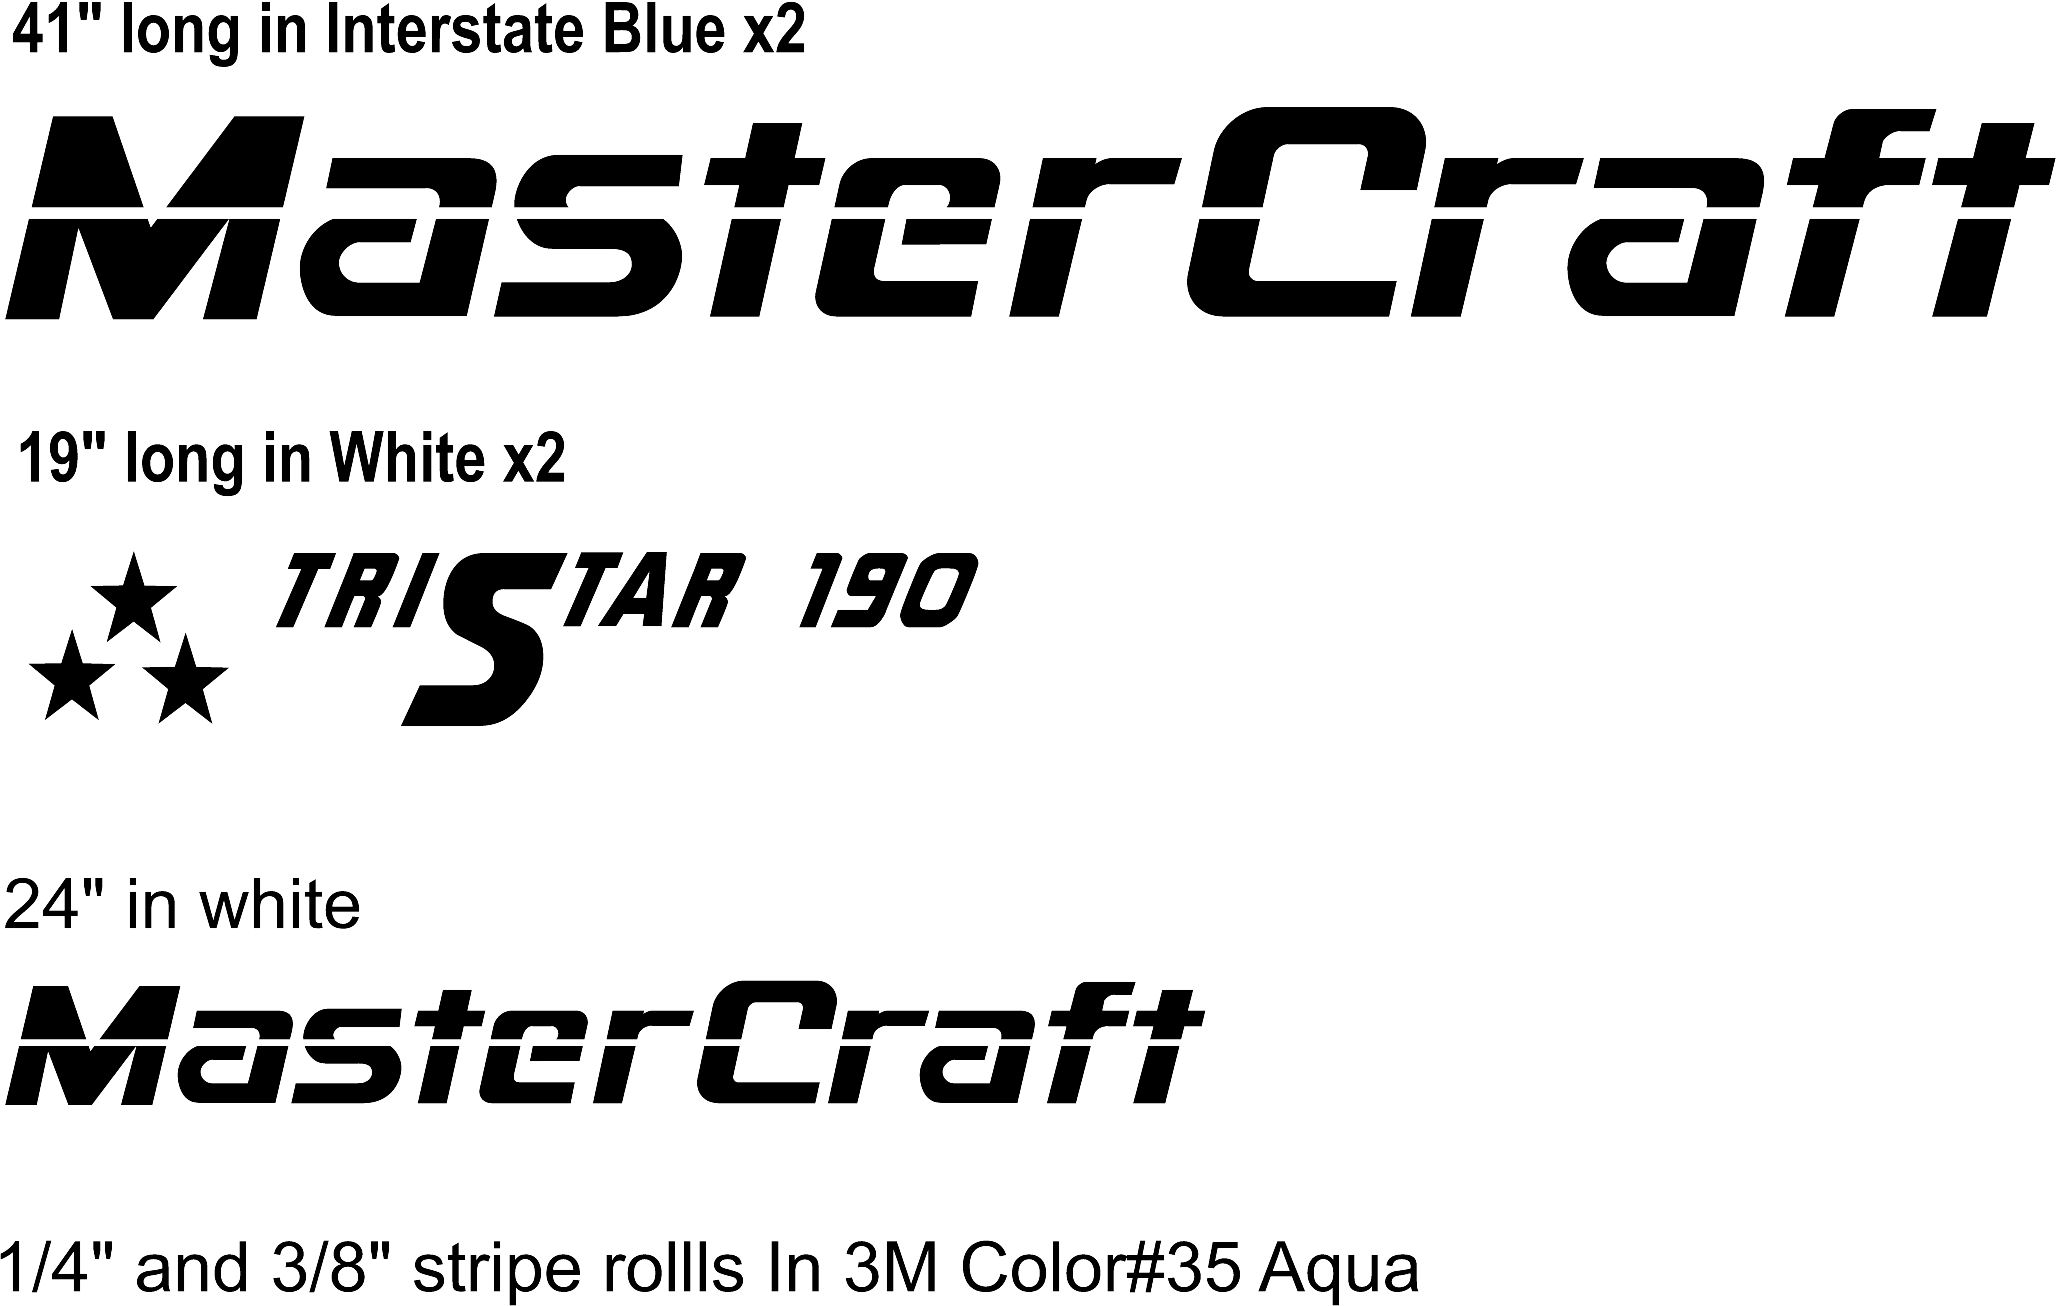 Order Form For Emailed Artwork Layouts tristar190